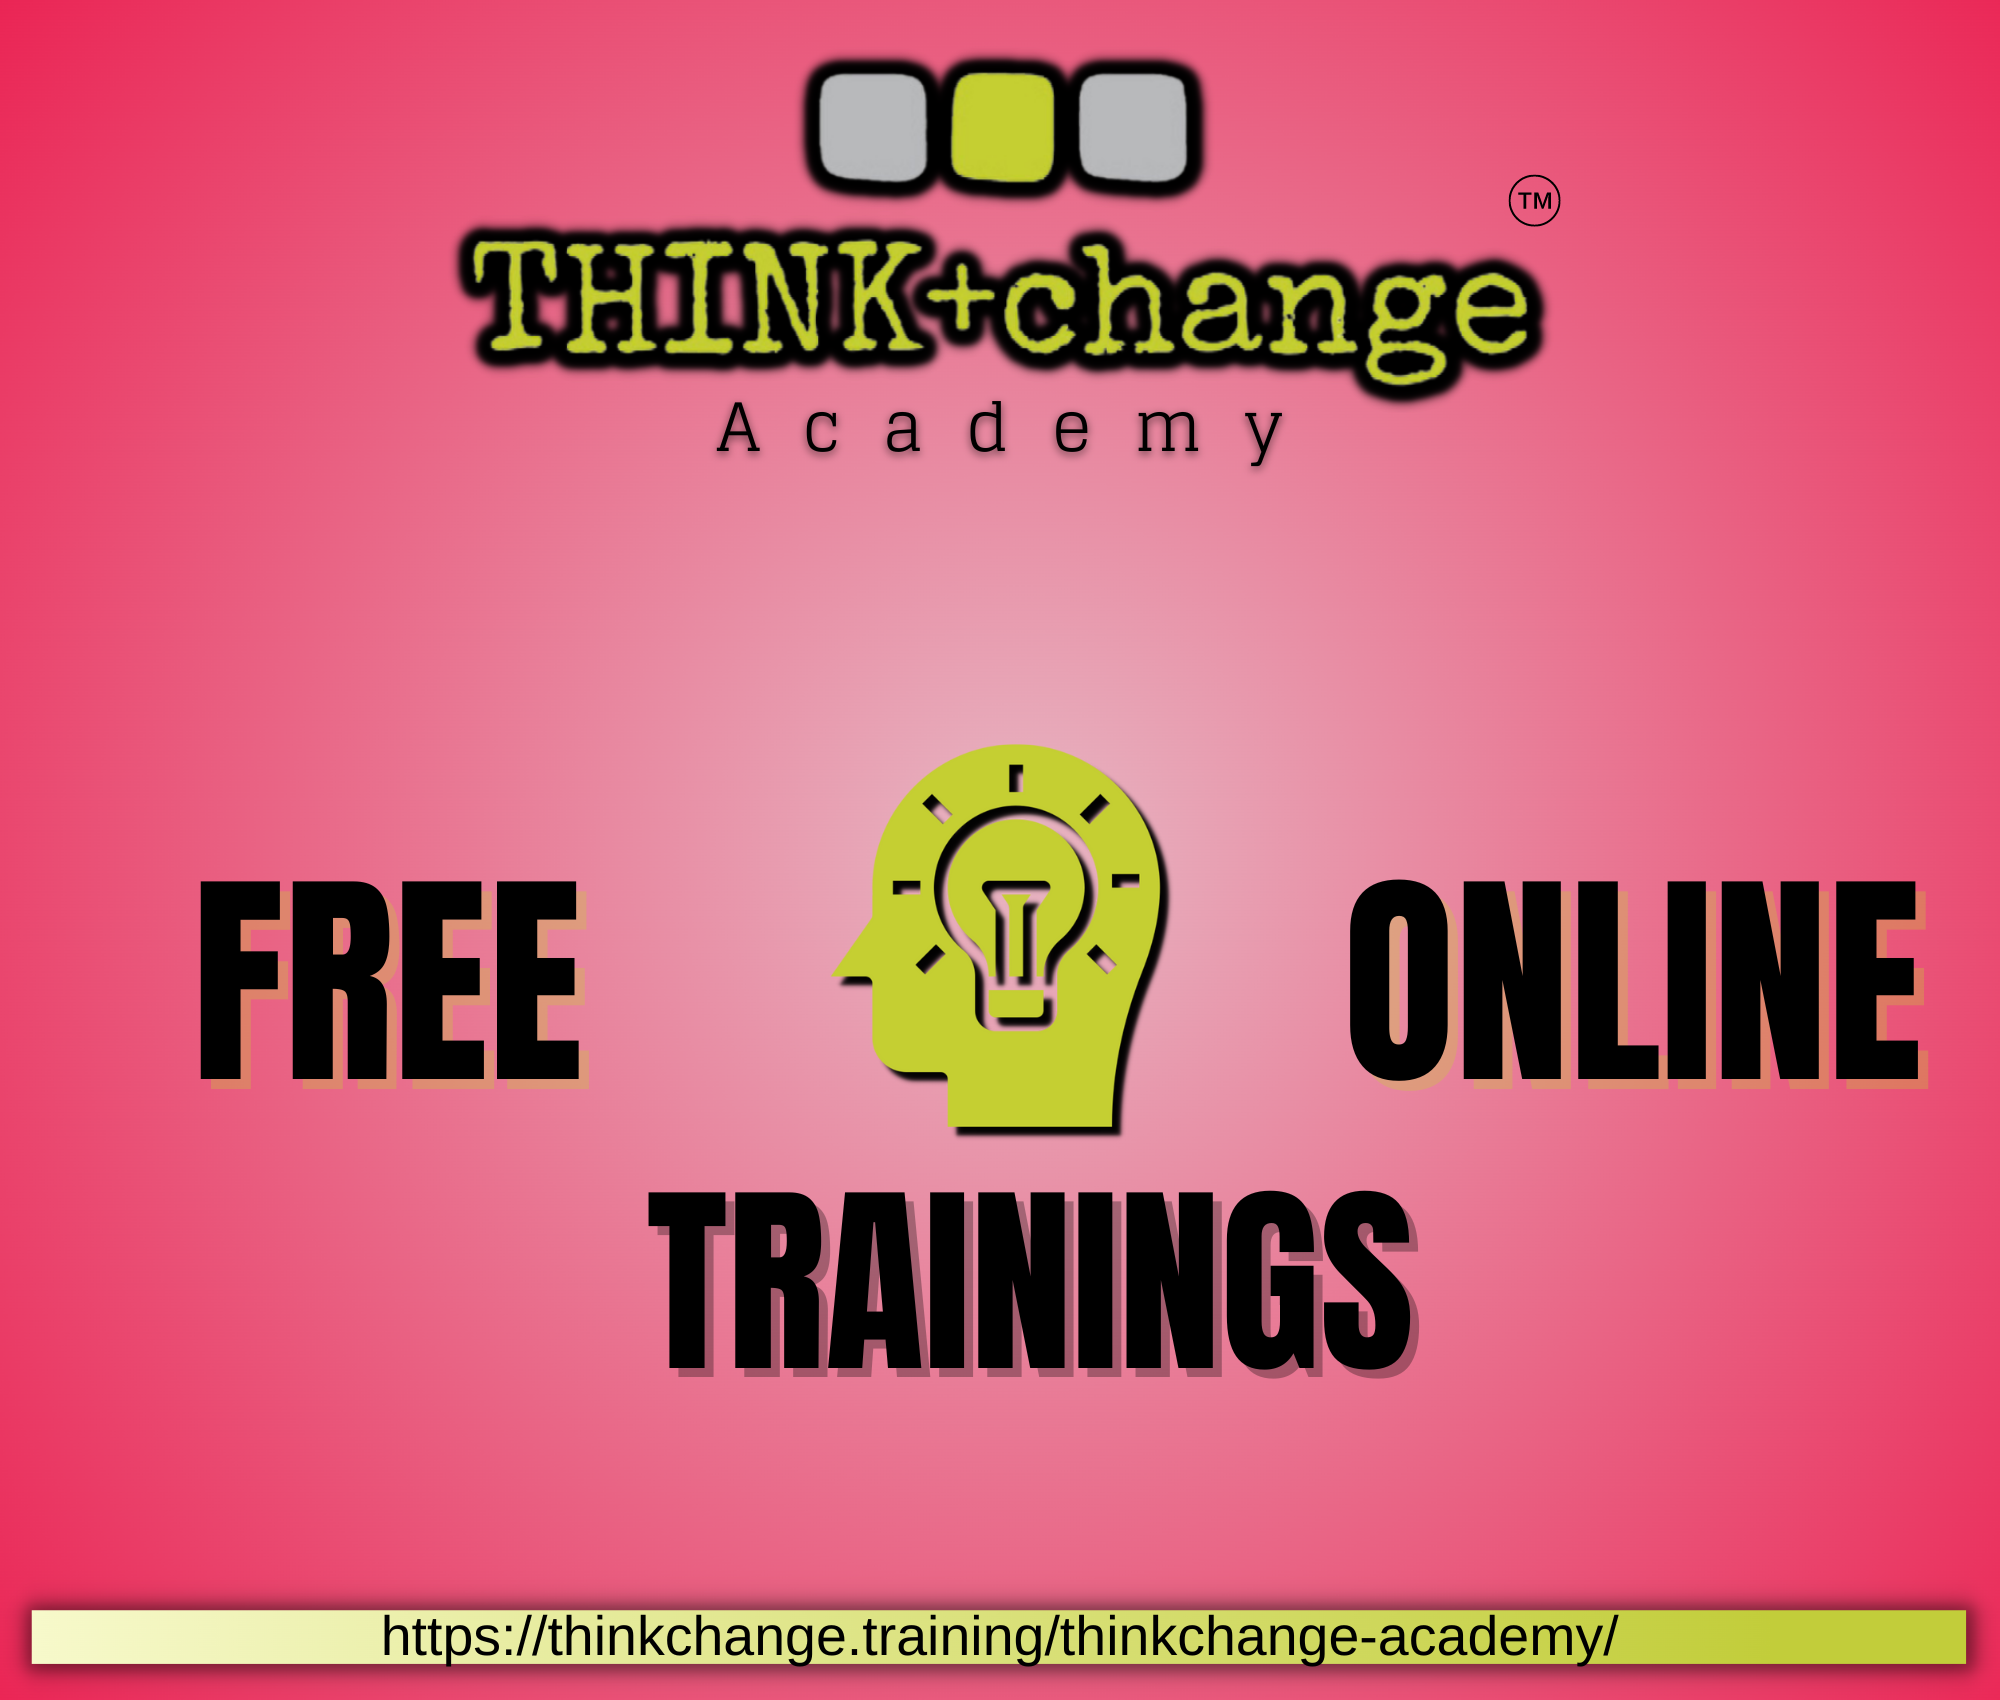 Red background with a logo that says THINK+change Academy. Free Online Trainings.